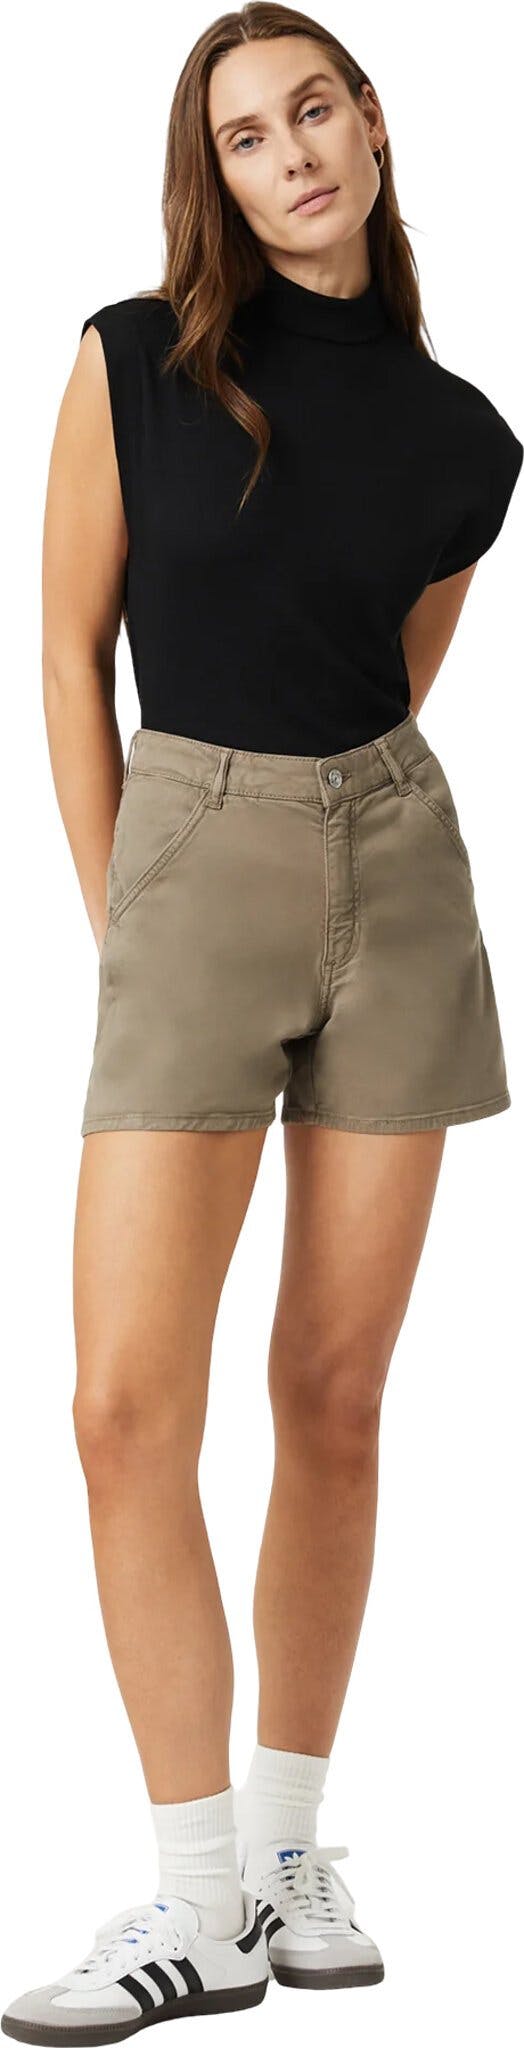 Product image for Kylie Utility Shorts - Women's